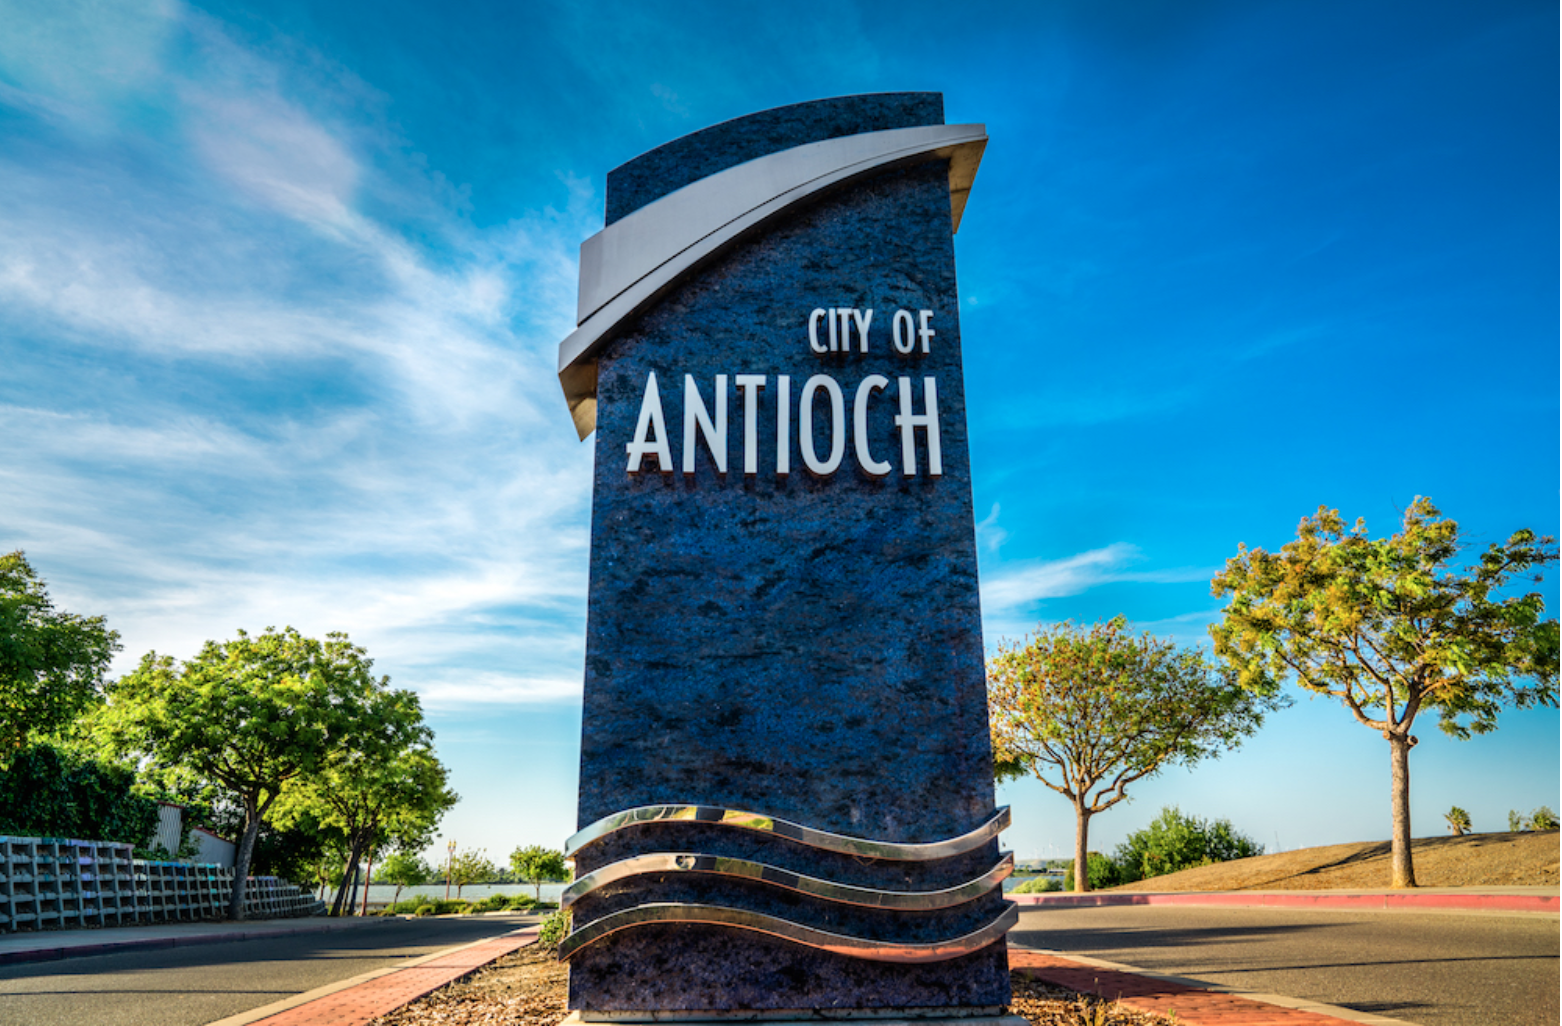 Image of the beautiful city of Antioch